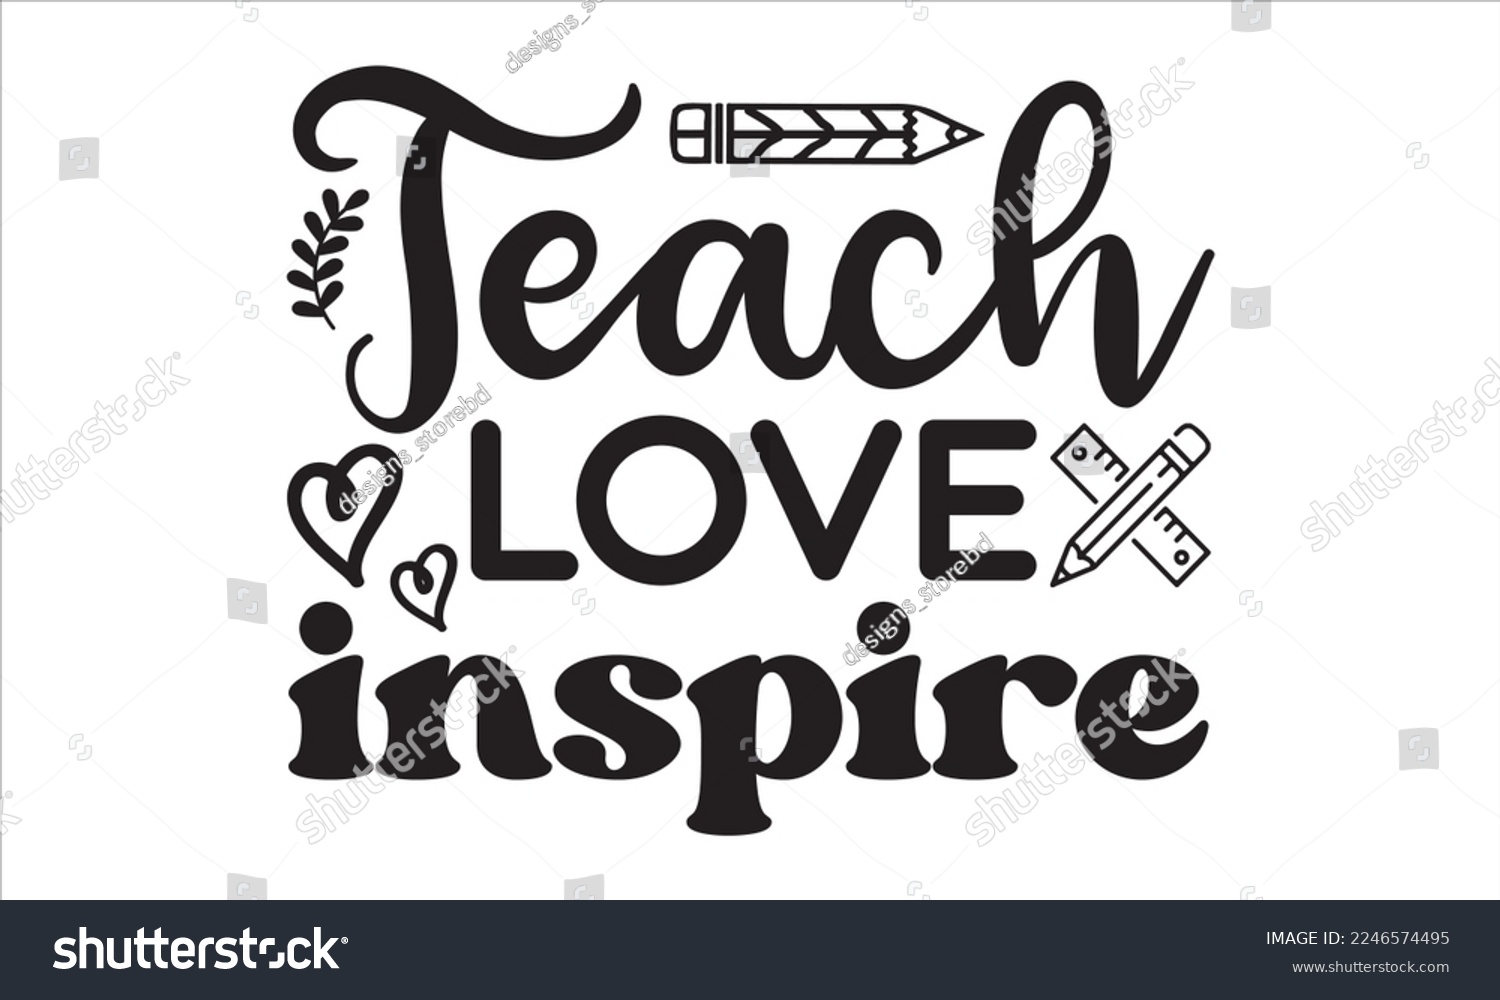 SVG of Teach love inspire Svg, Teacher SVG, Teacher SVG t-shirt design, Hand drawn lettering phrases, templet, Calligraphy graphic design, SVG Files for Cutting Cricut and Silhouette svg